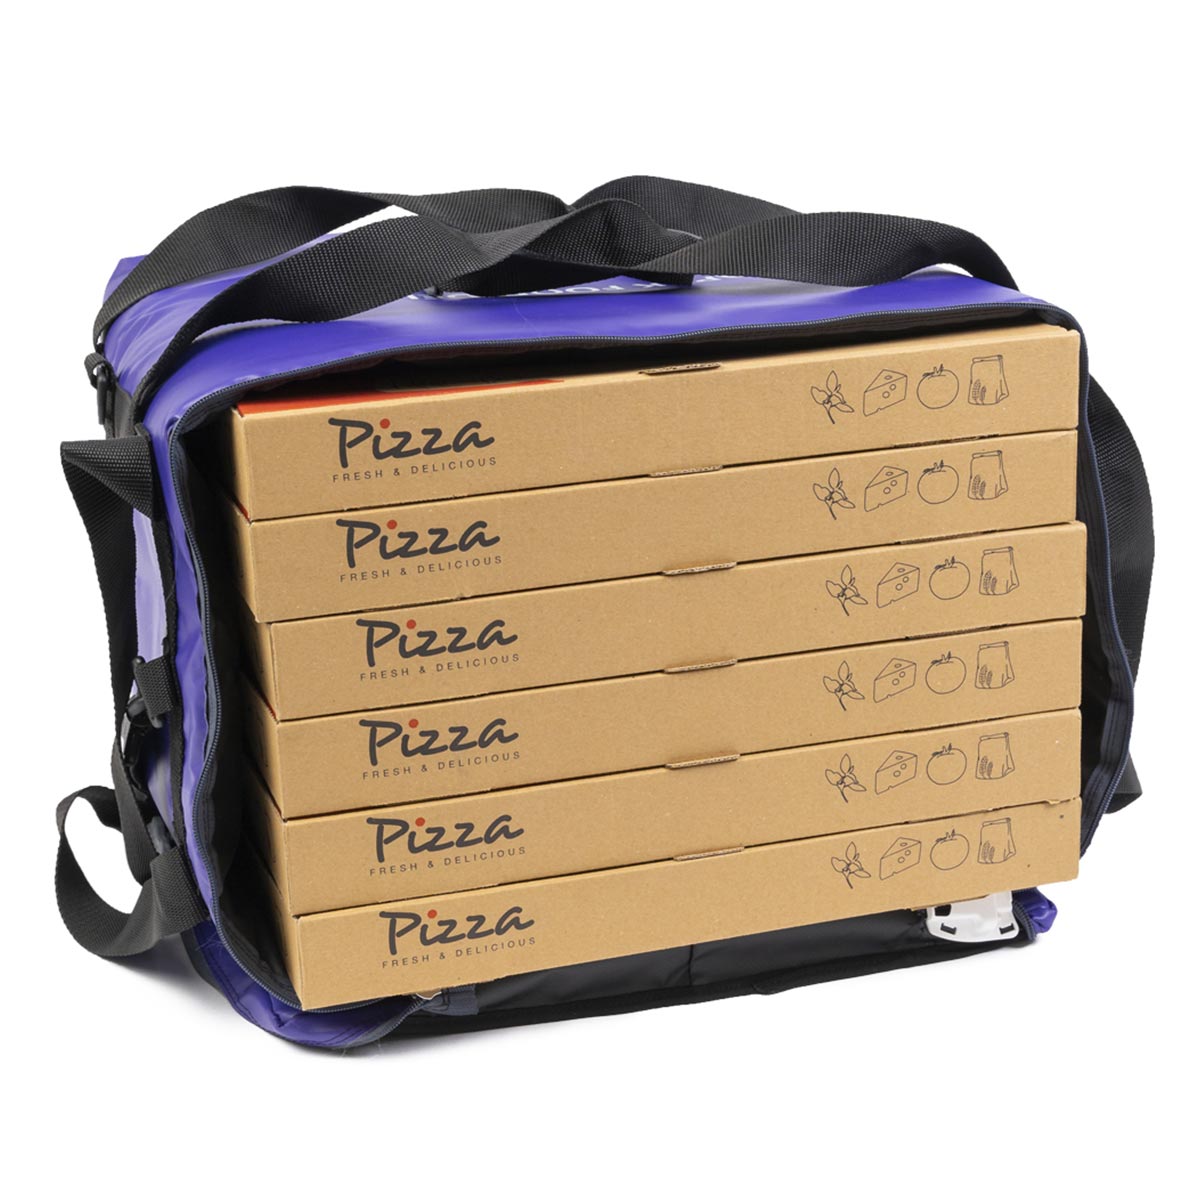 Versapak Insulated Pizza Delivery Carrying Bag with Pizza Boxes